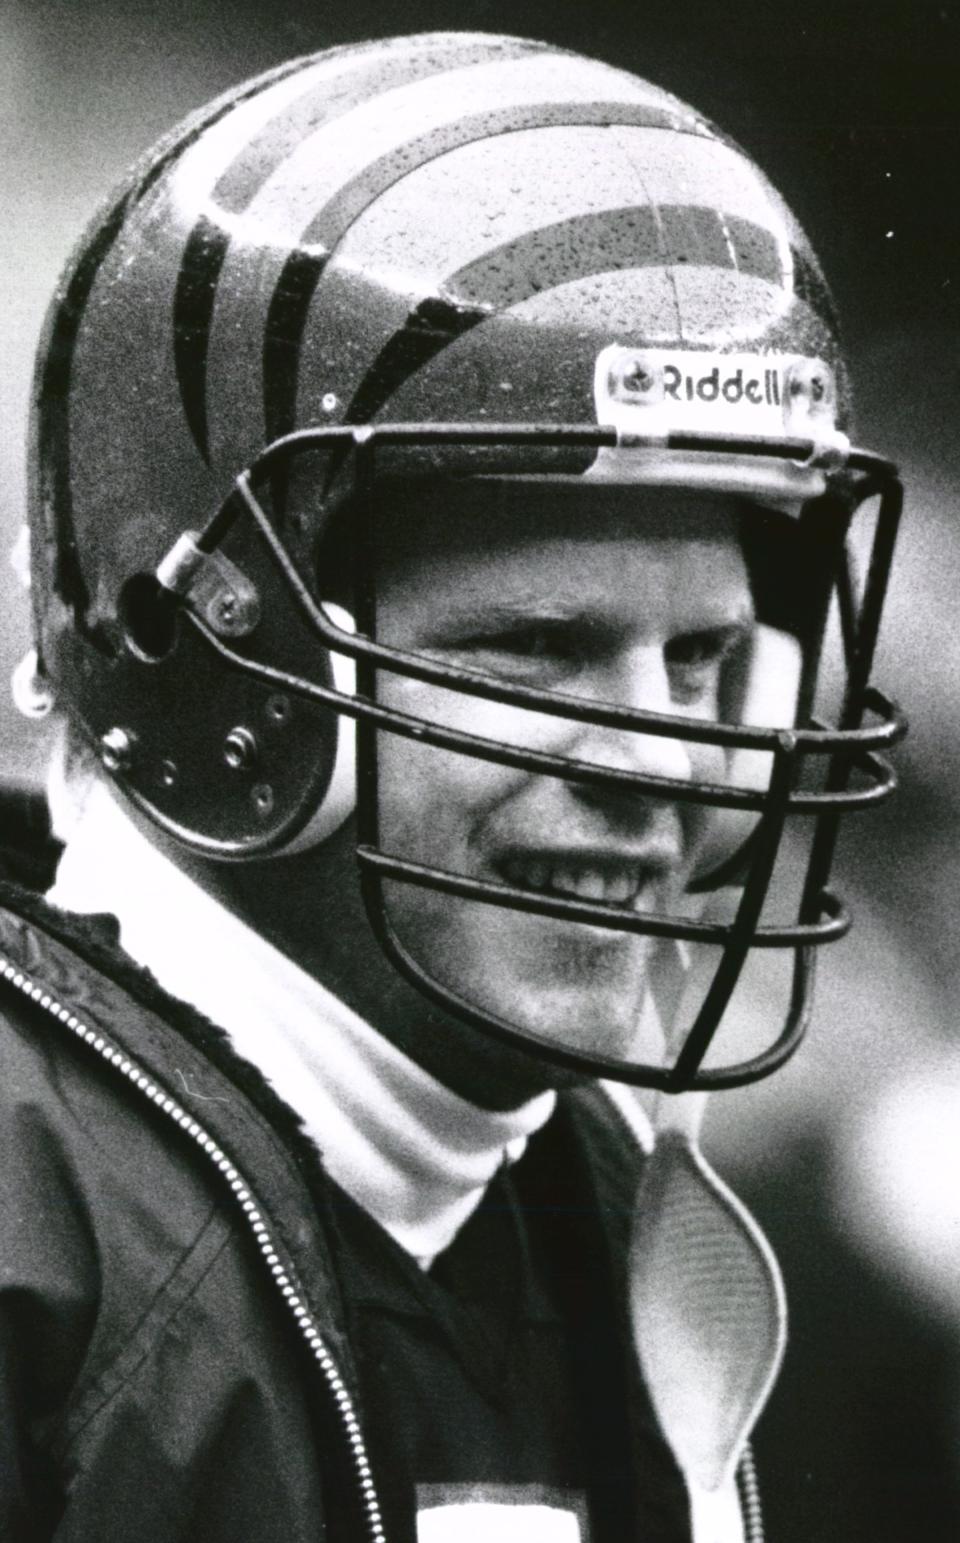 JANUARY 6, 1991: A smiling Boomer Esiason in the third quarter after a win against the Oilers was secure.The Enquirer/Jim CallawayFROM A MONDAY JANUARY 7, 1991 ARTICLEPlay of the game -  Boomer Esiason's 10-yard rollout touchdown run was certainly not necessary, since it served only to expand the Bengals' margin to 34-0. Still, it was s sign of the Cincinnati recent groin pull and he threw the ball into the second deck of the stands without wincing.